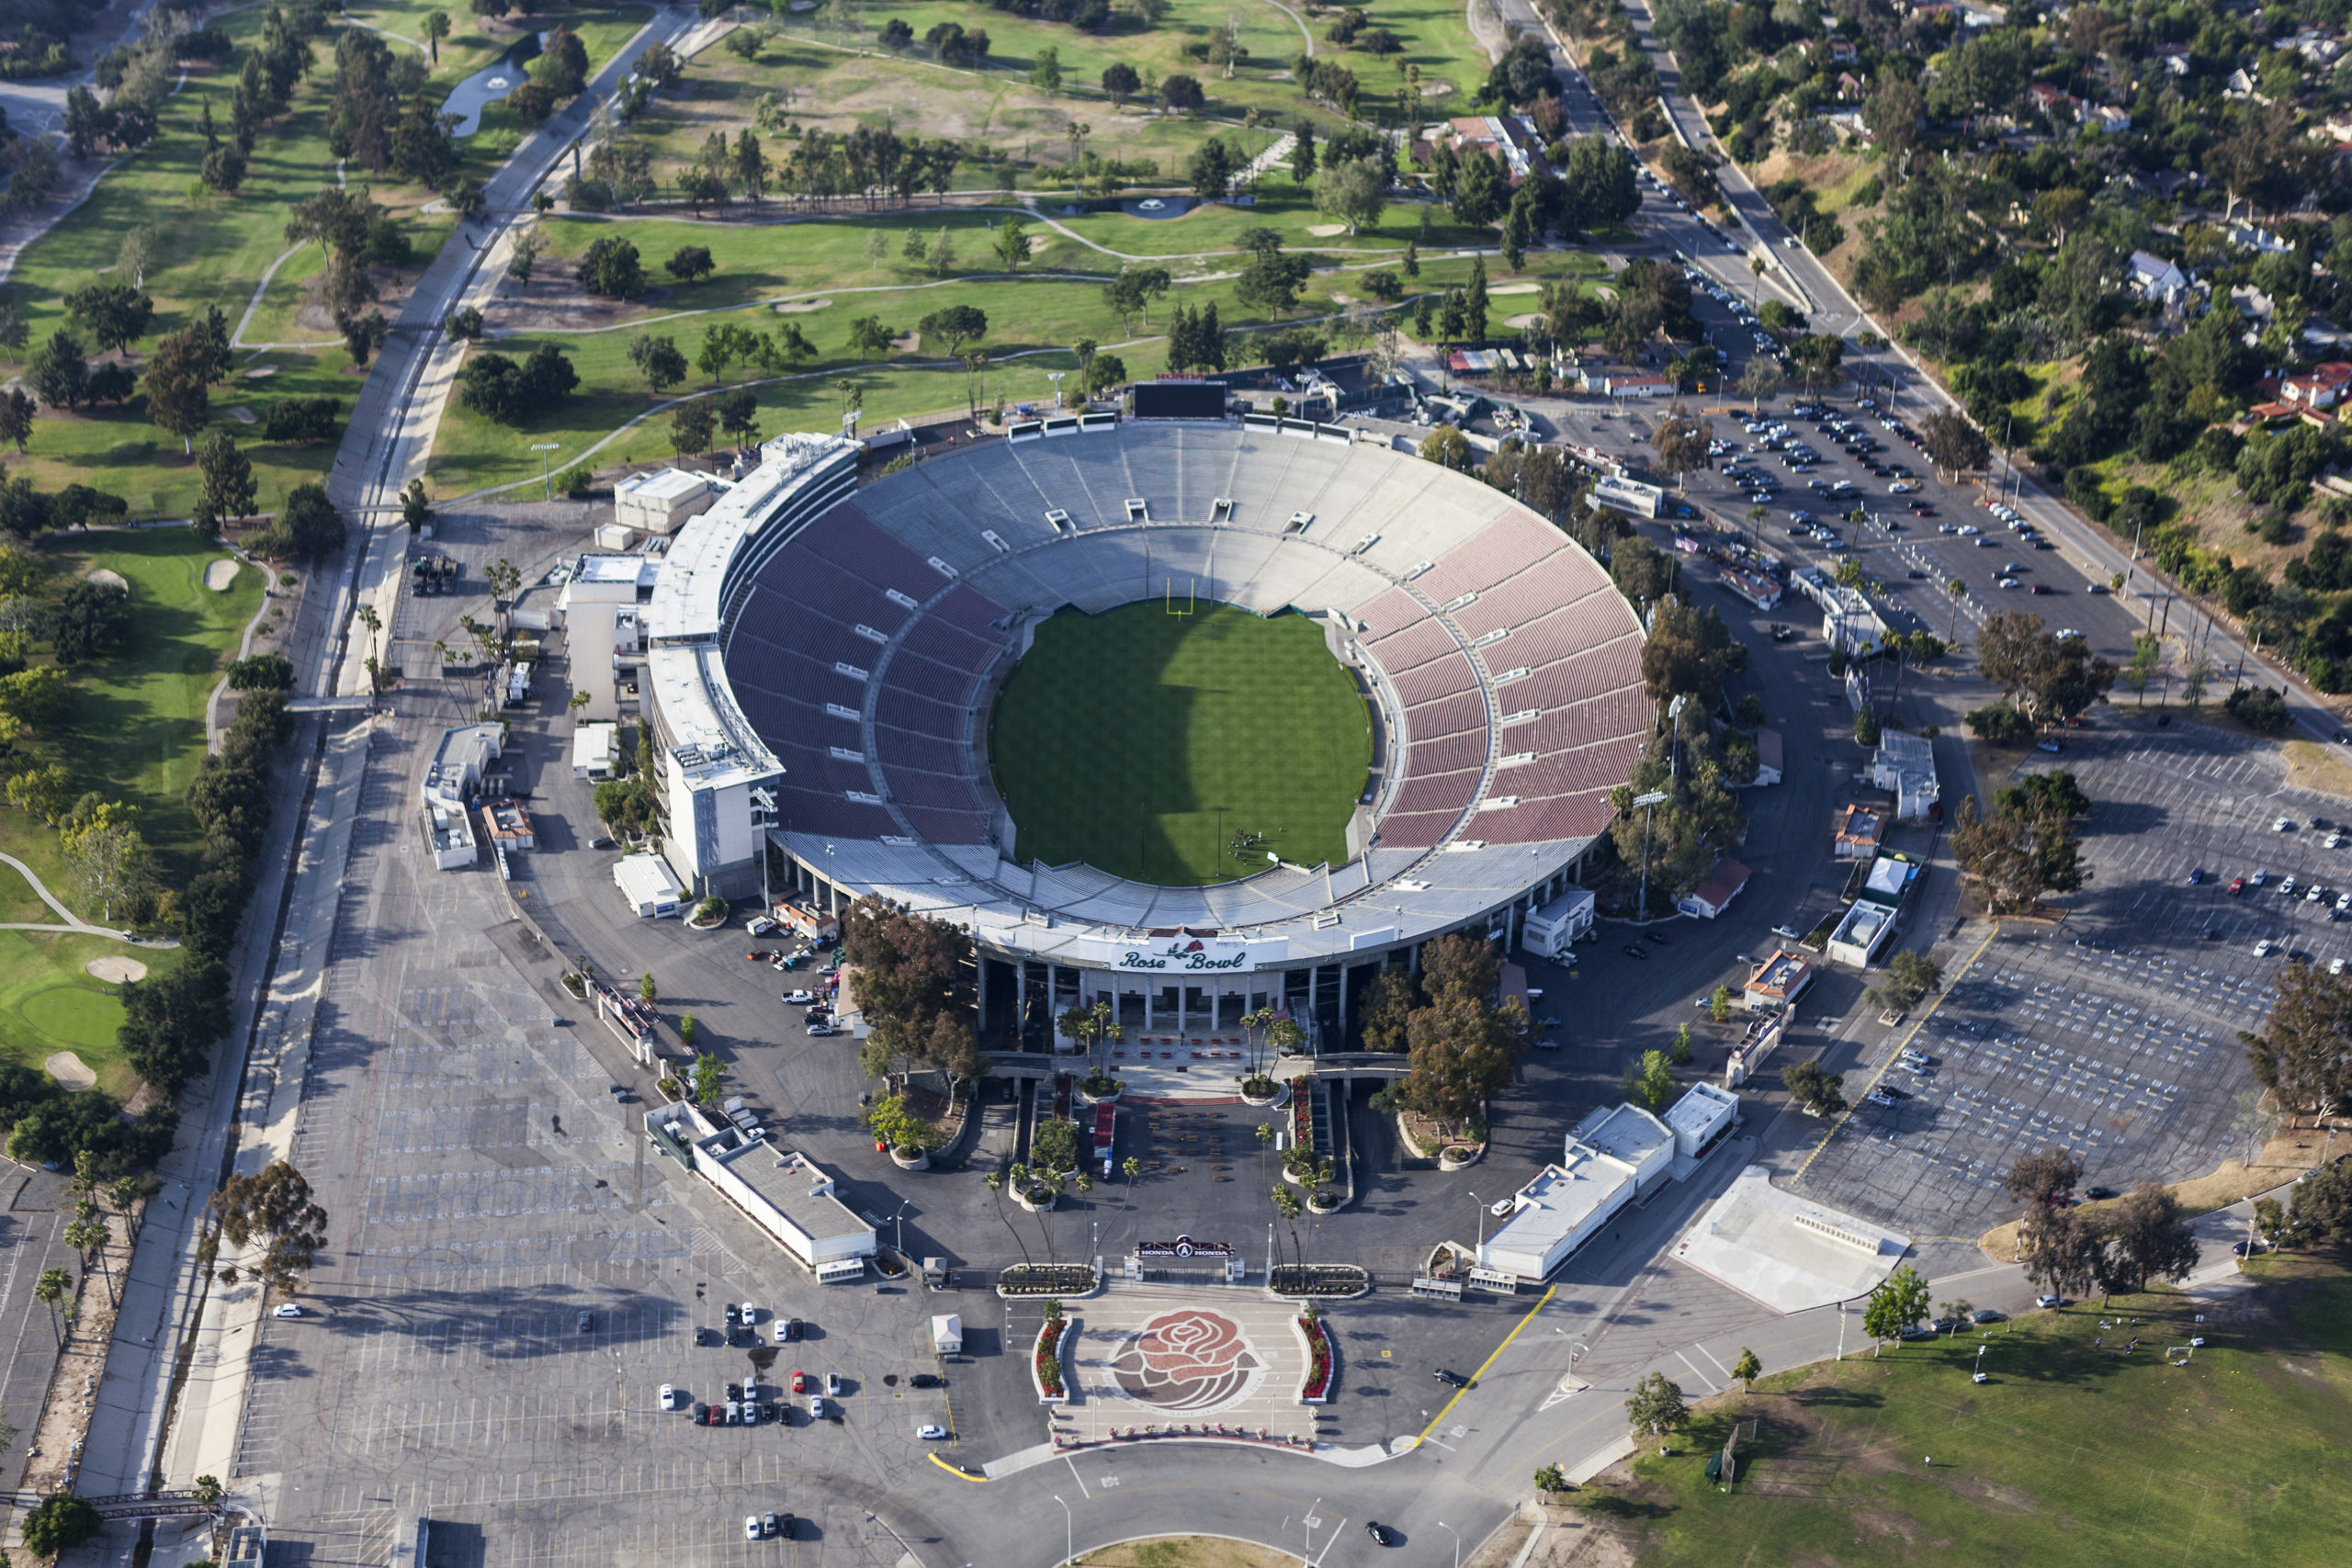 ROSE BOWL College Football Game Retains Name During Texas Move The